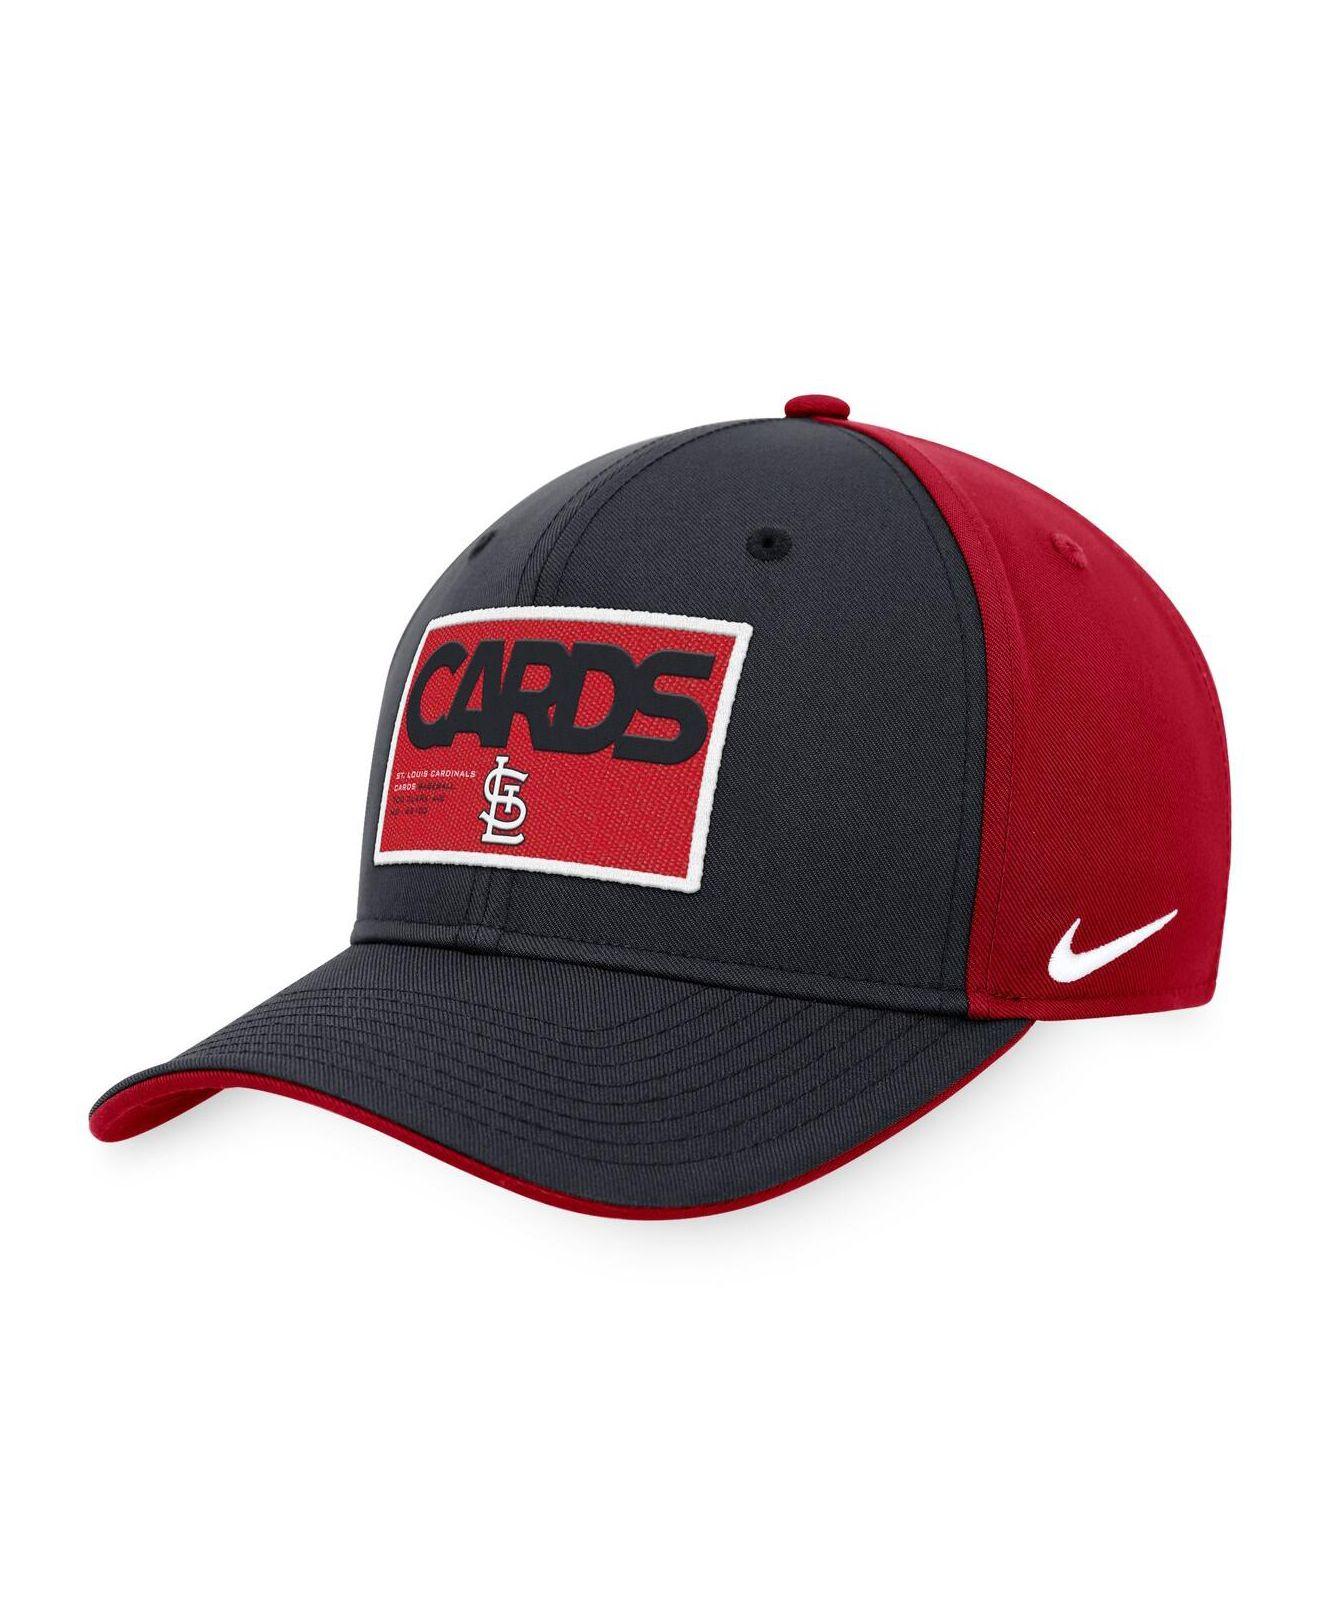 Lids St. Louis Cardinals Nike Cooperstown Collection Heritage86 Adjustable  Hat - Light Blue